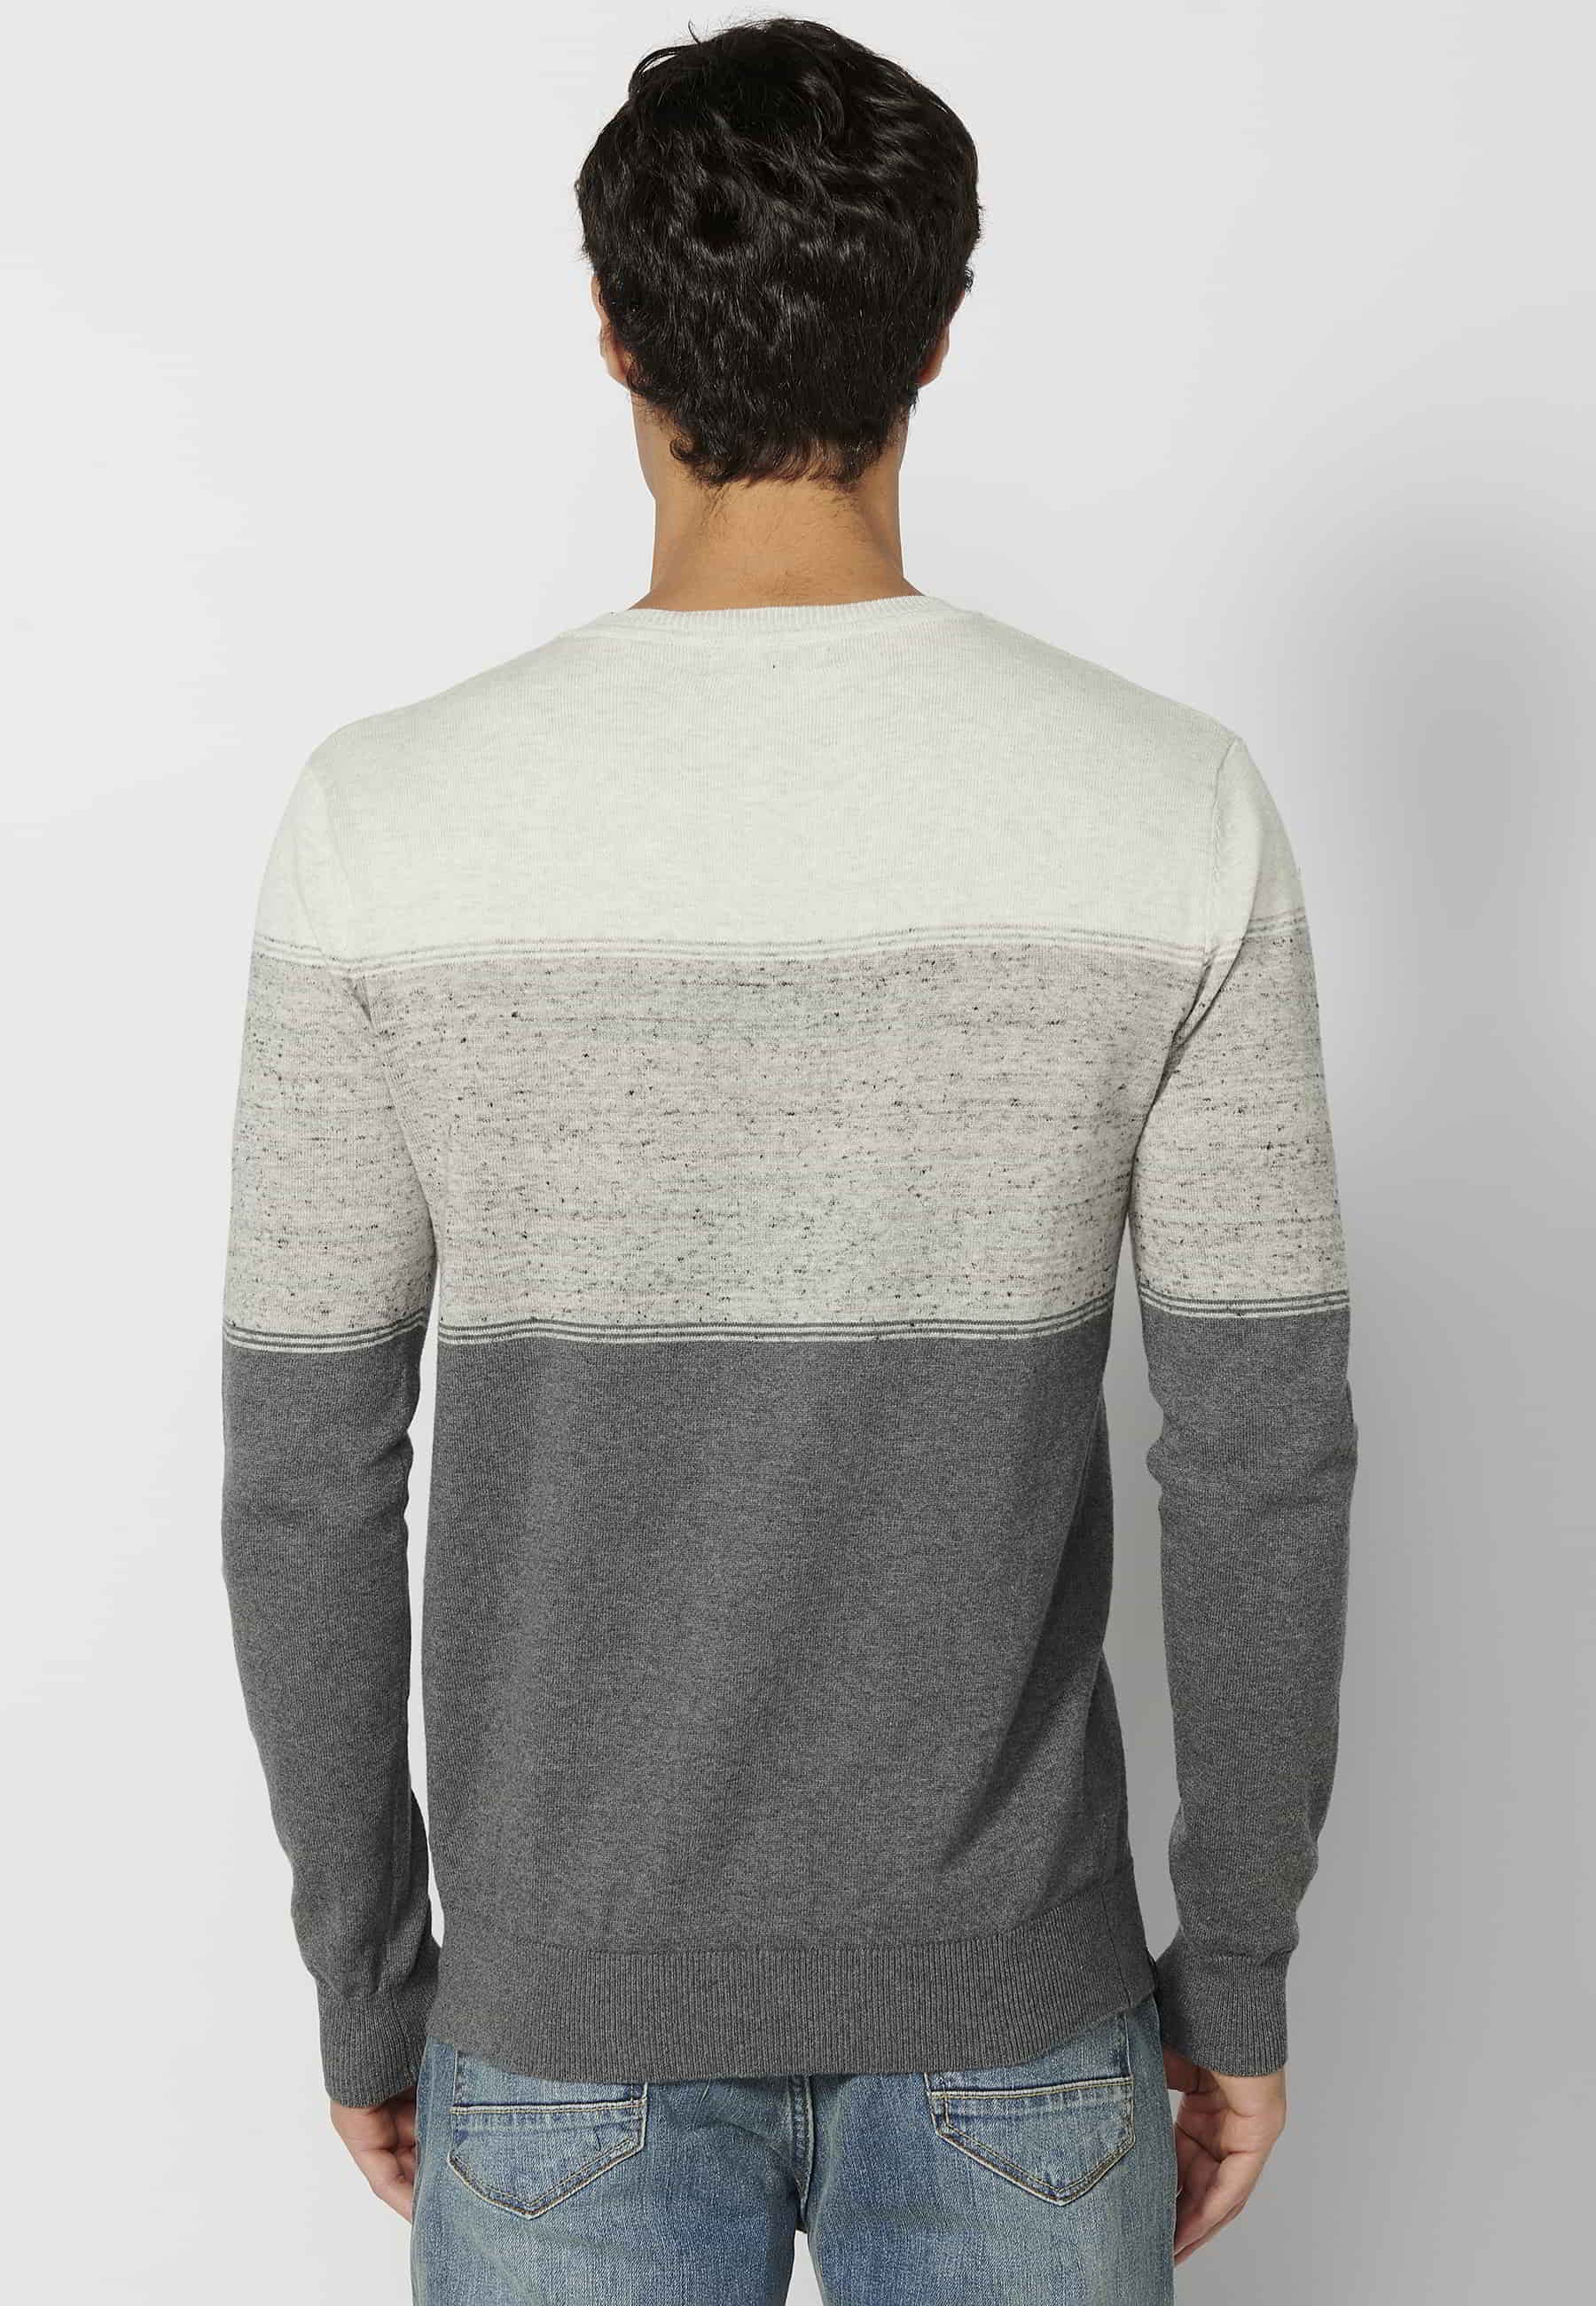 Men's Gray Round Neck Long Sleeve Cotton Knit Sweater 6